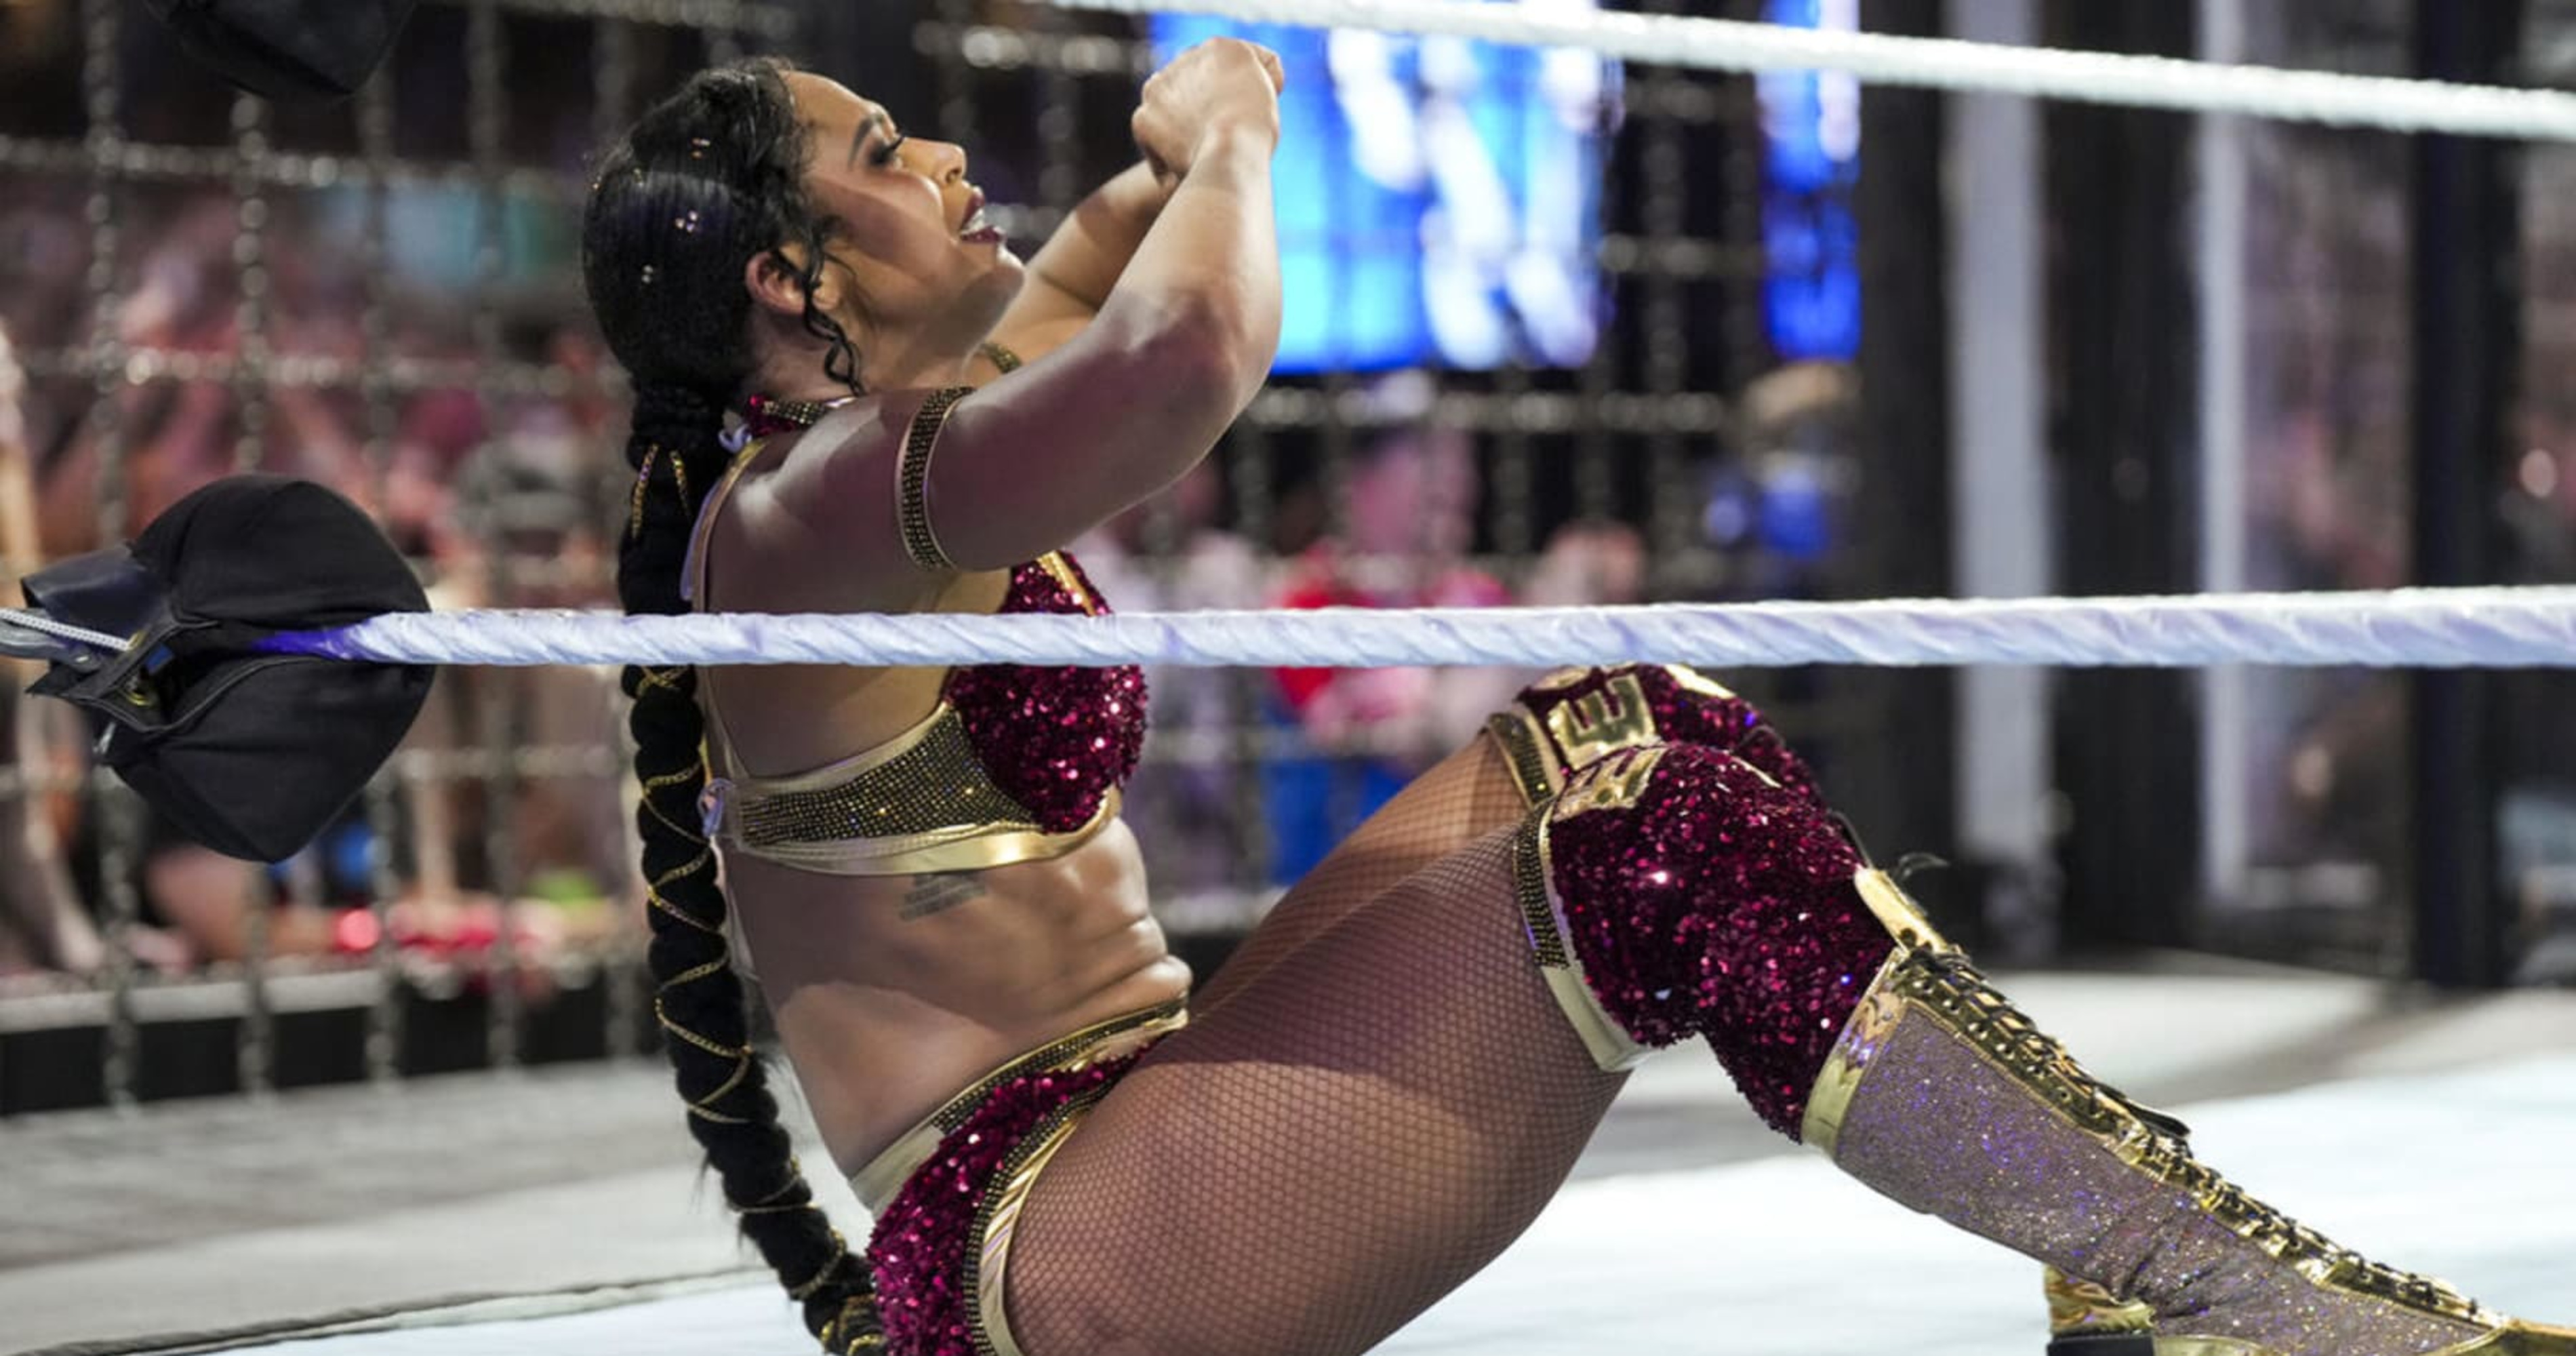 What's Next for Bianca Belair and the Losers of WWE Elimination Chamber Matches?